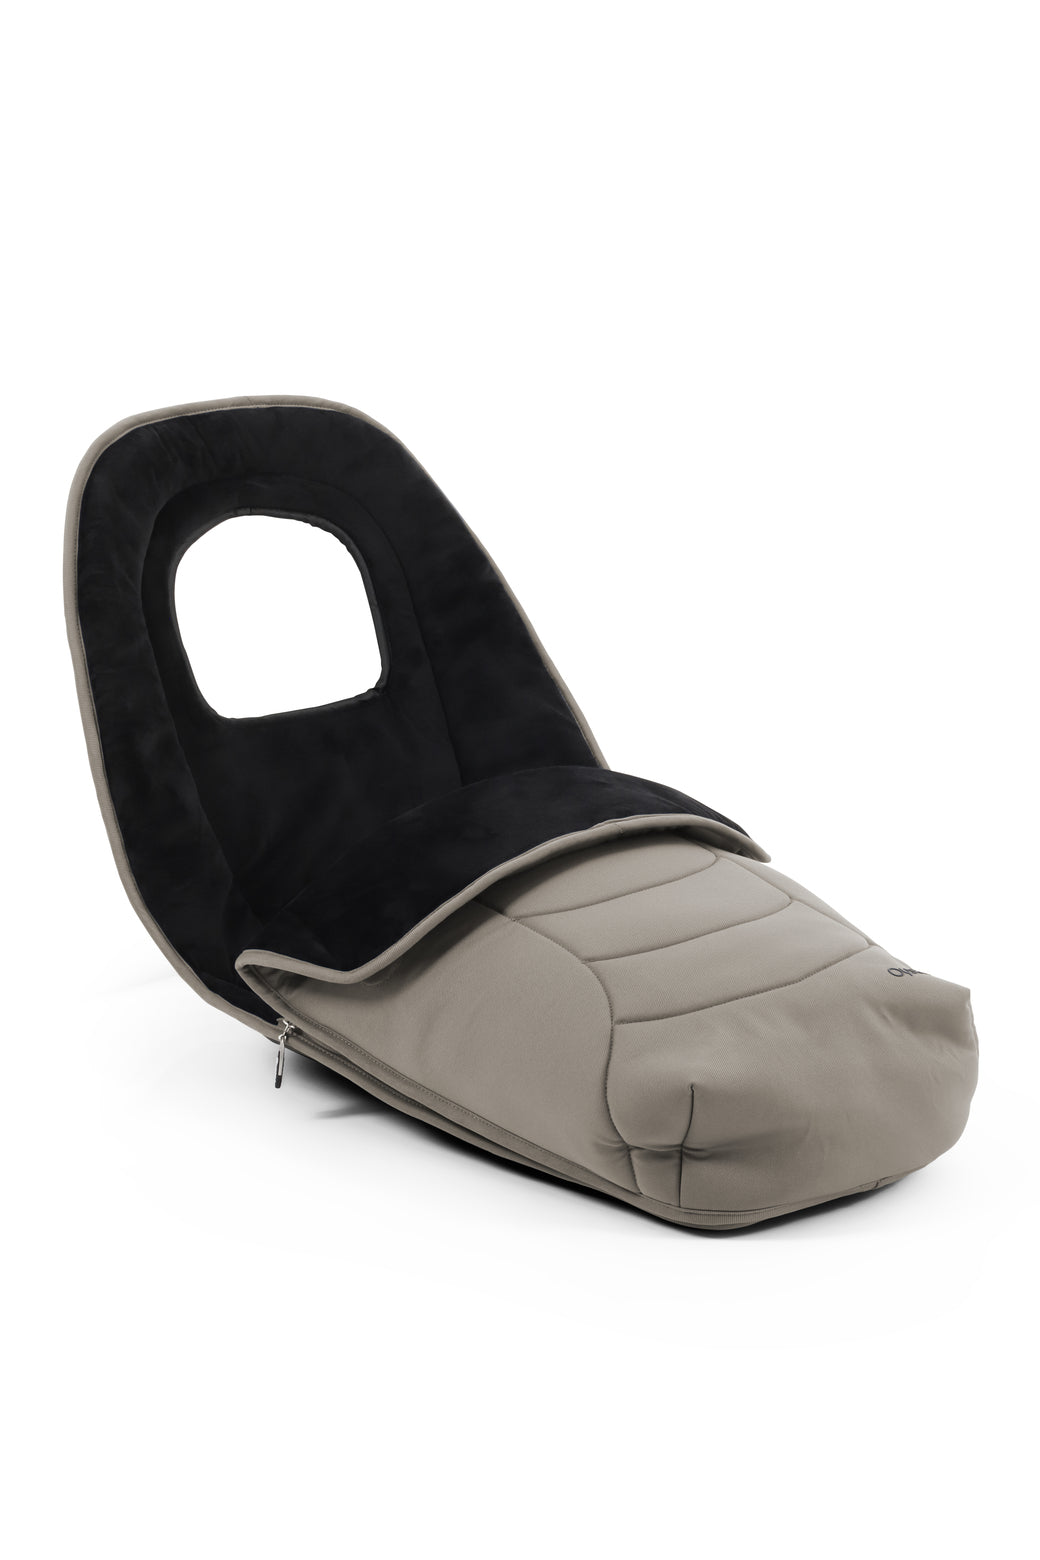 BabyStyle Oyster 3 Footmuff - Stone - For Your Little One